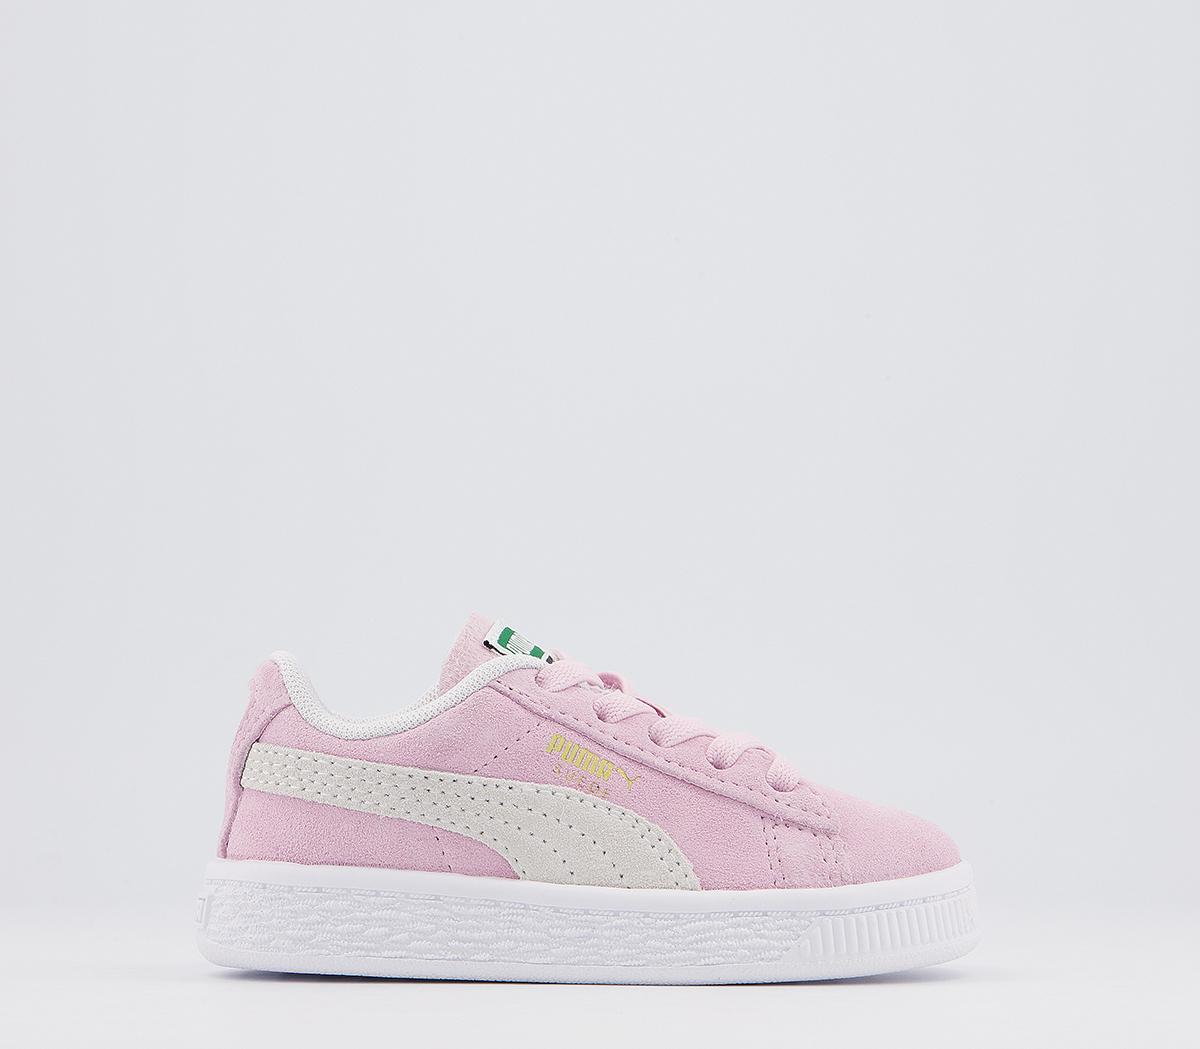 PUMASuede Classic Xxl Infant TrainersPink Lady White